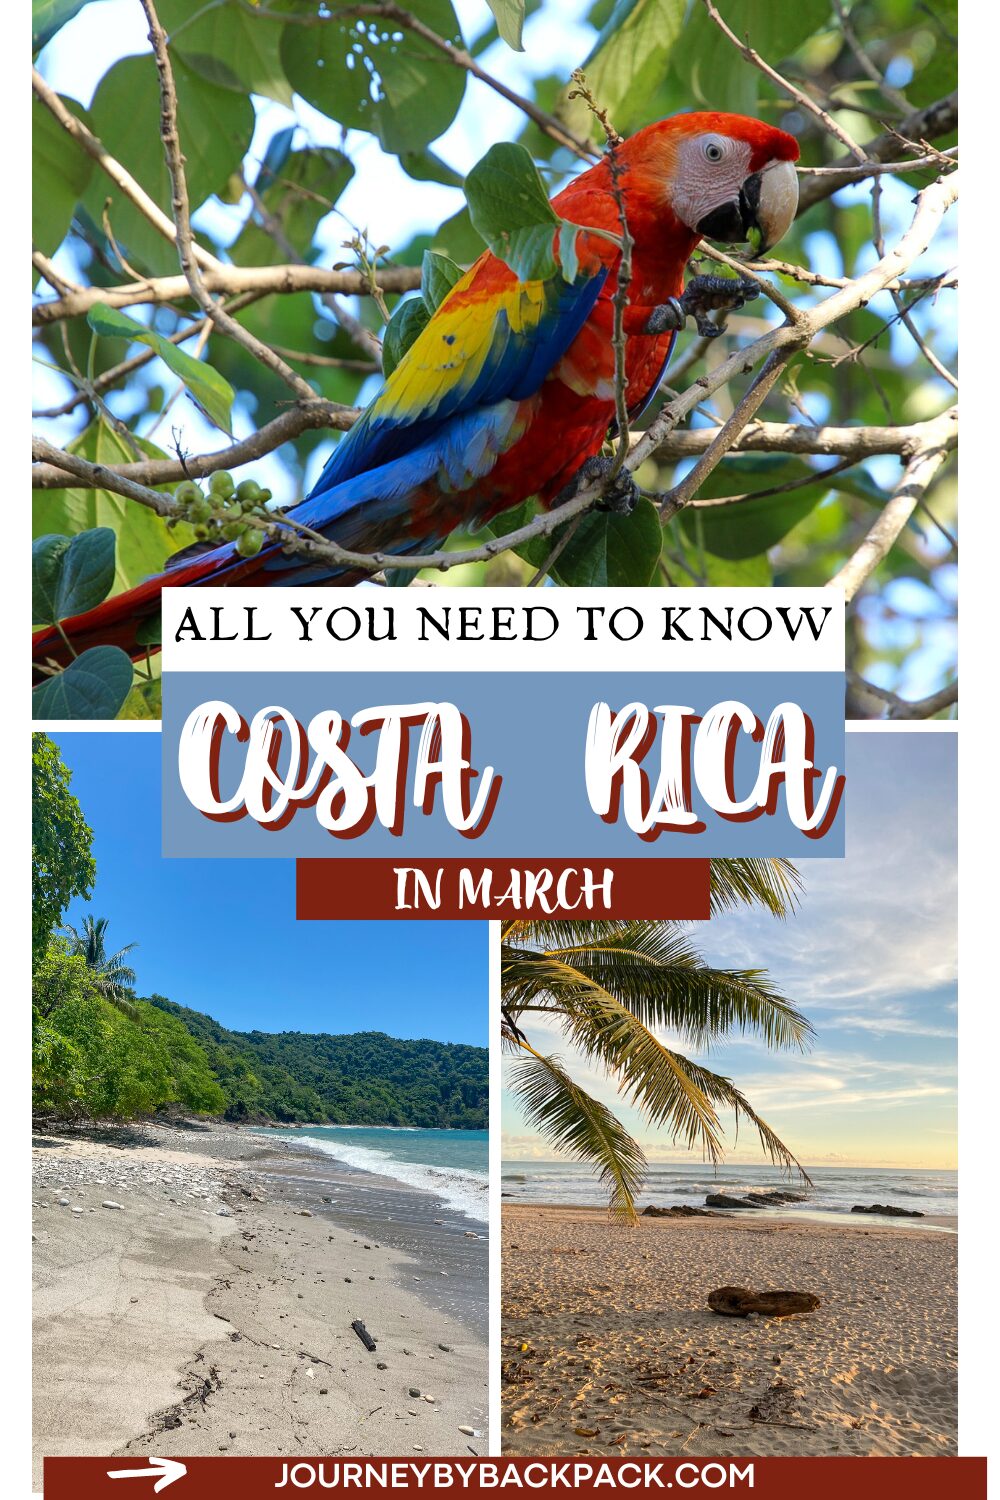 Visiting Costa Rica in March